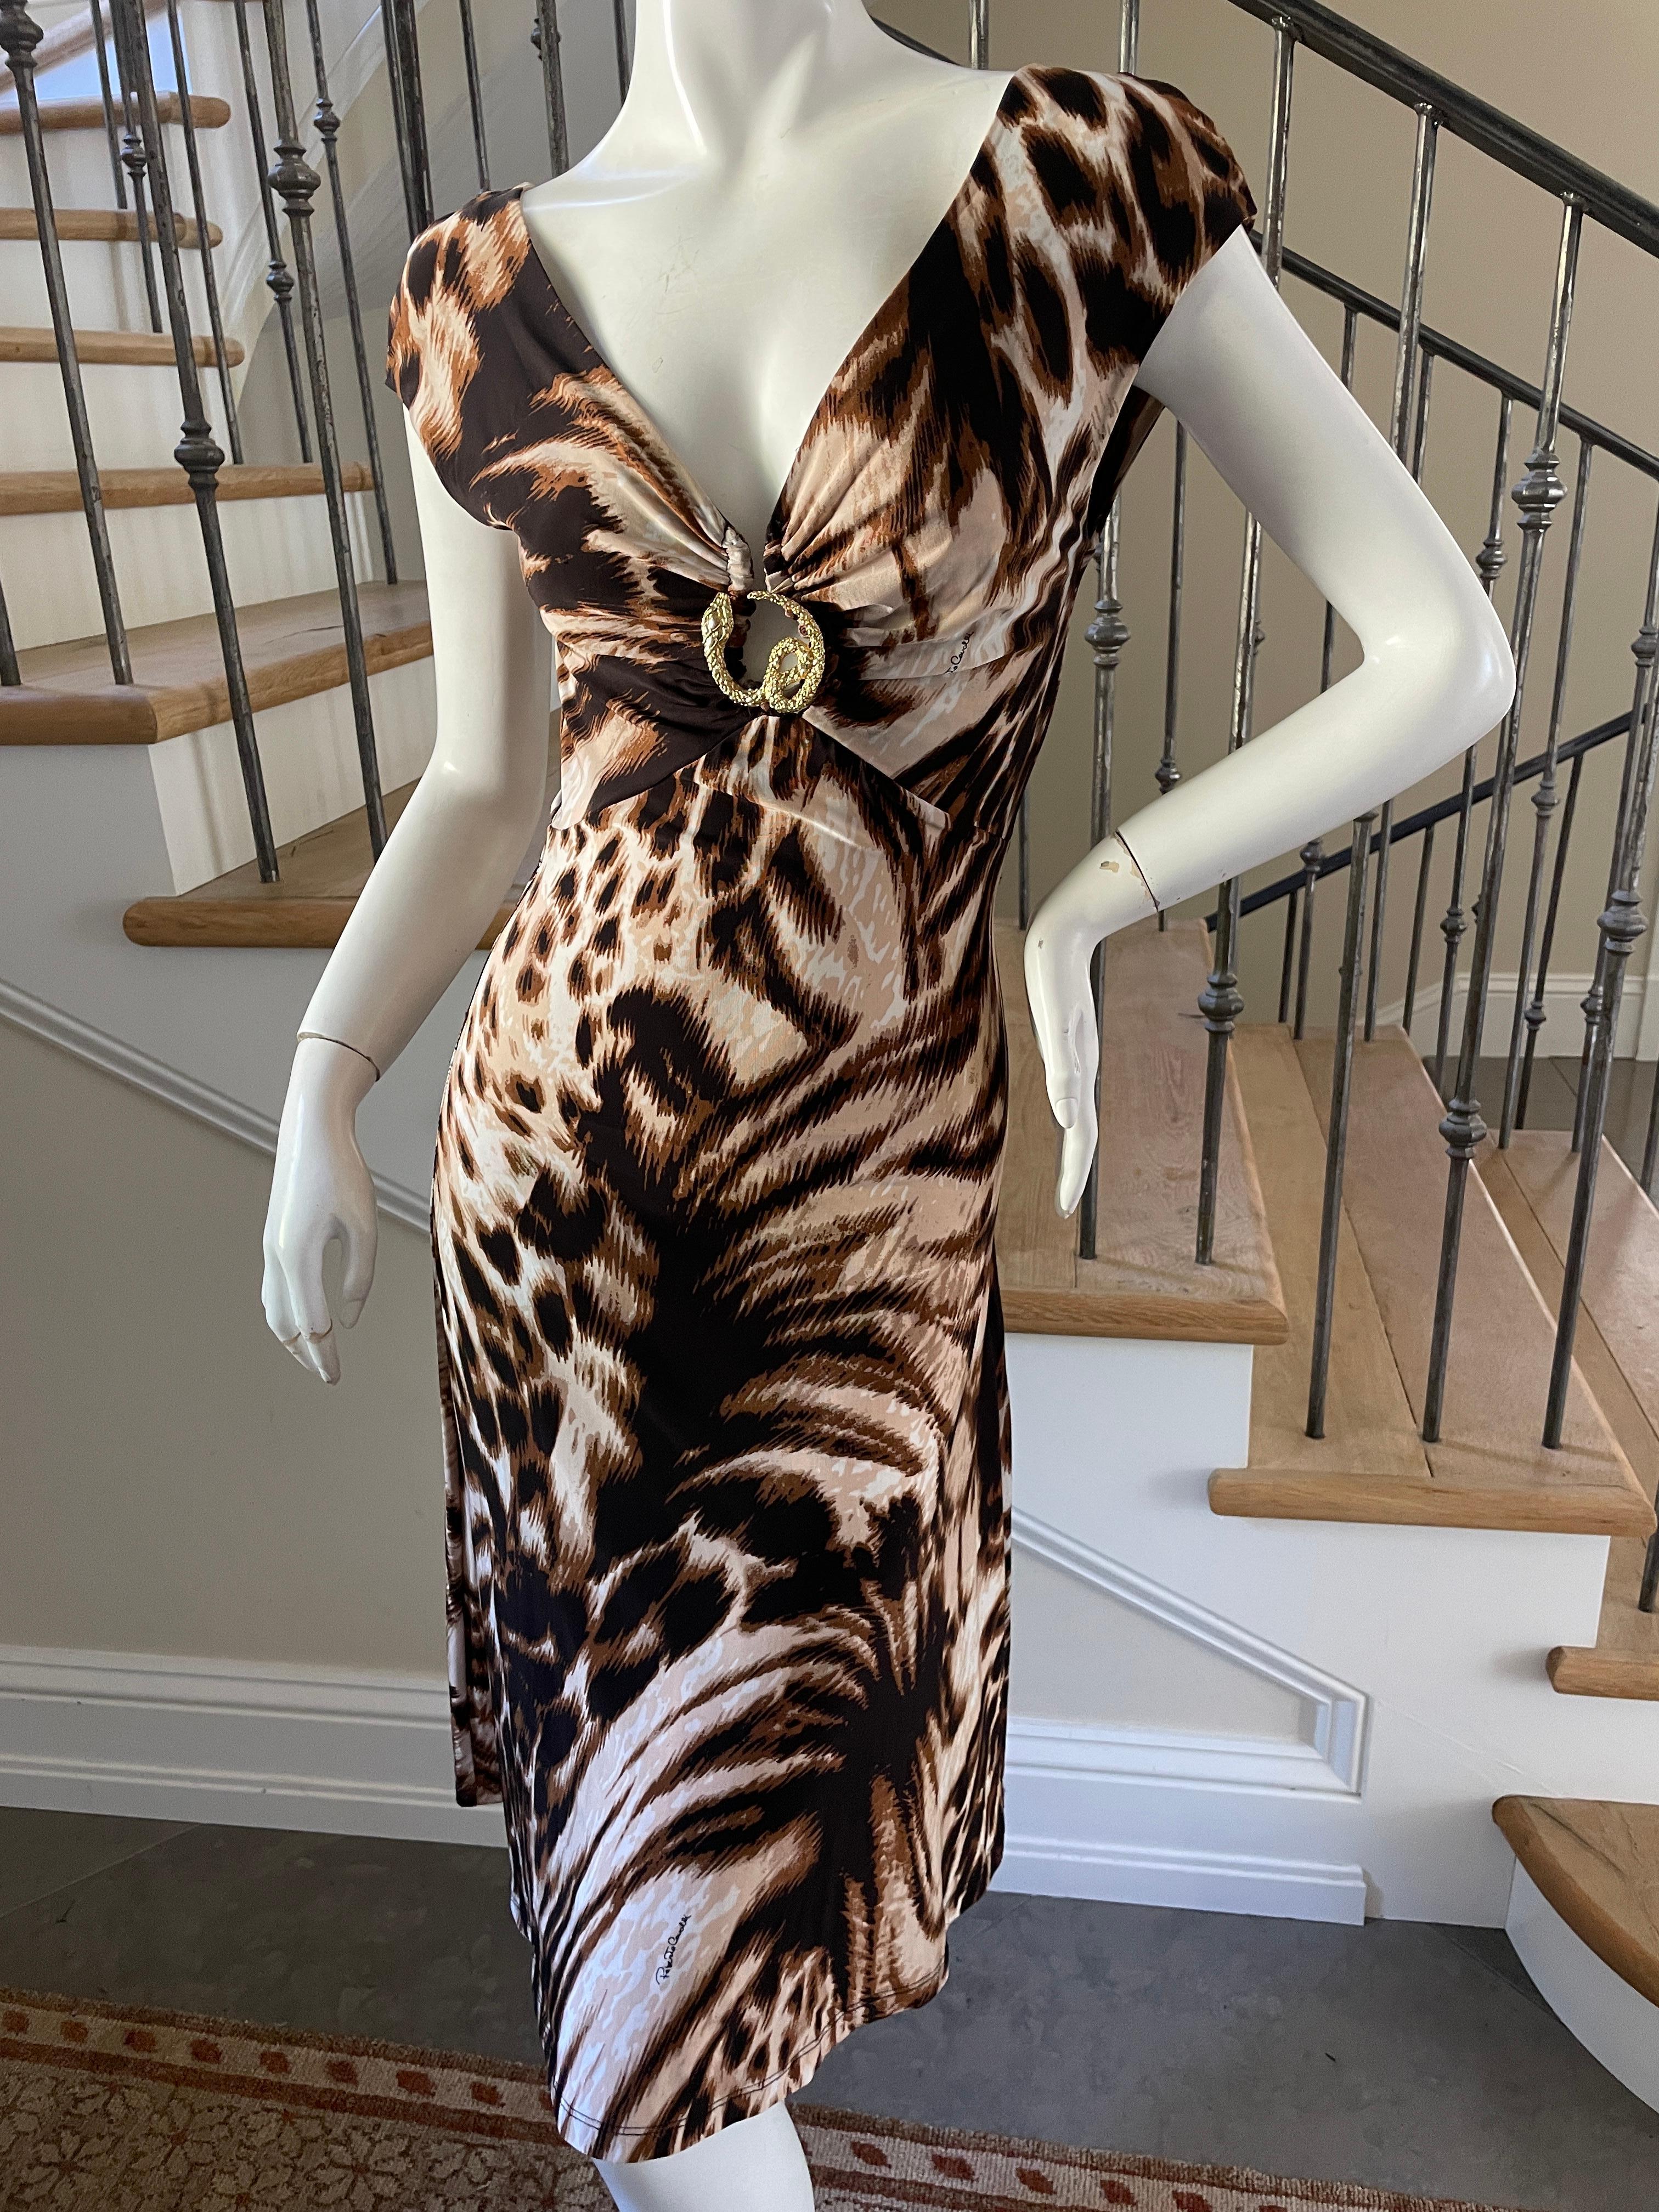 Roberto Cavalli Vintage Plunging Animal Print Cocktail Dress with Snake Ornament
Size S, lot's of stretch
Bust 34